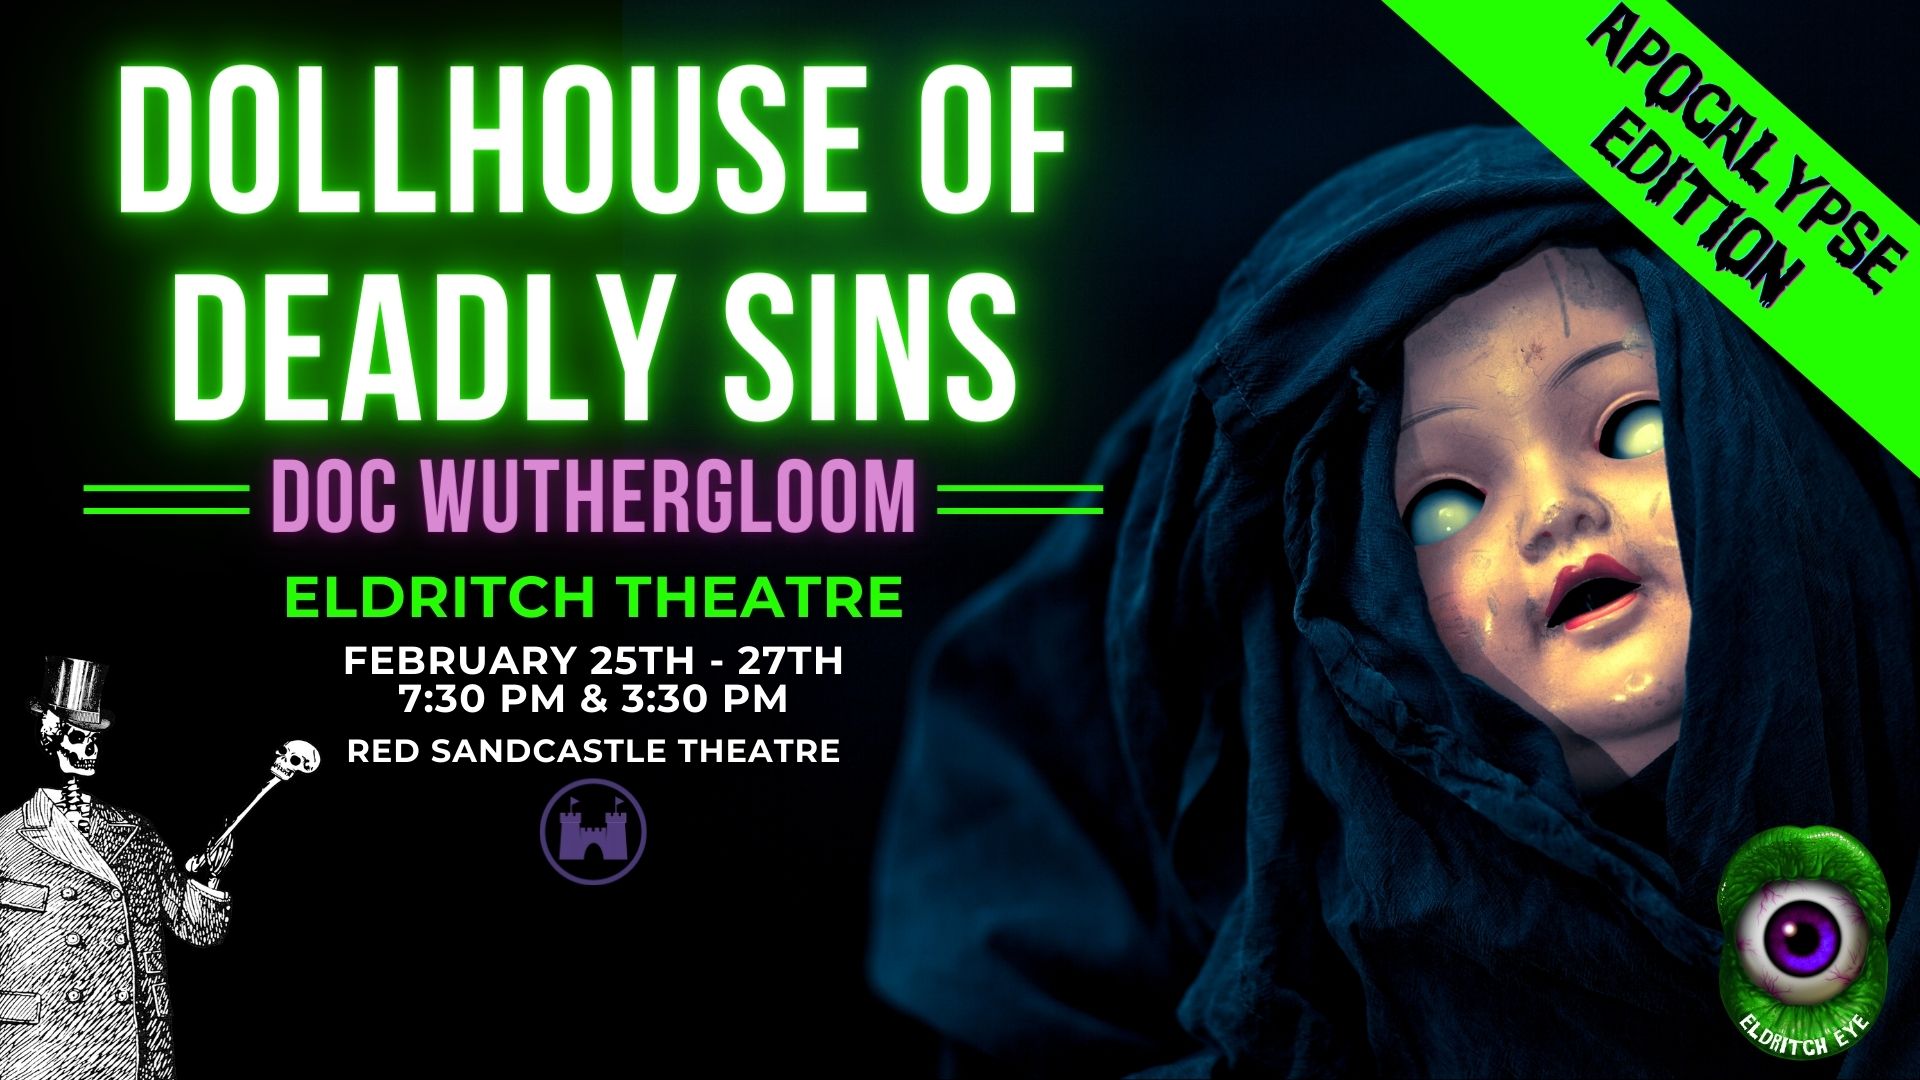 Doc Wutherloom’s Dollhouse of Deadly Sins